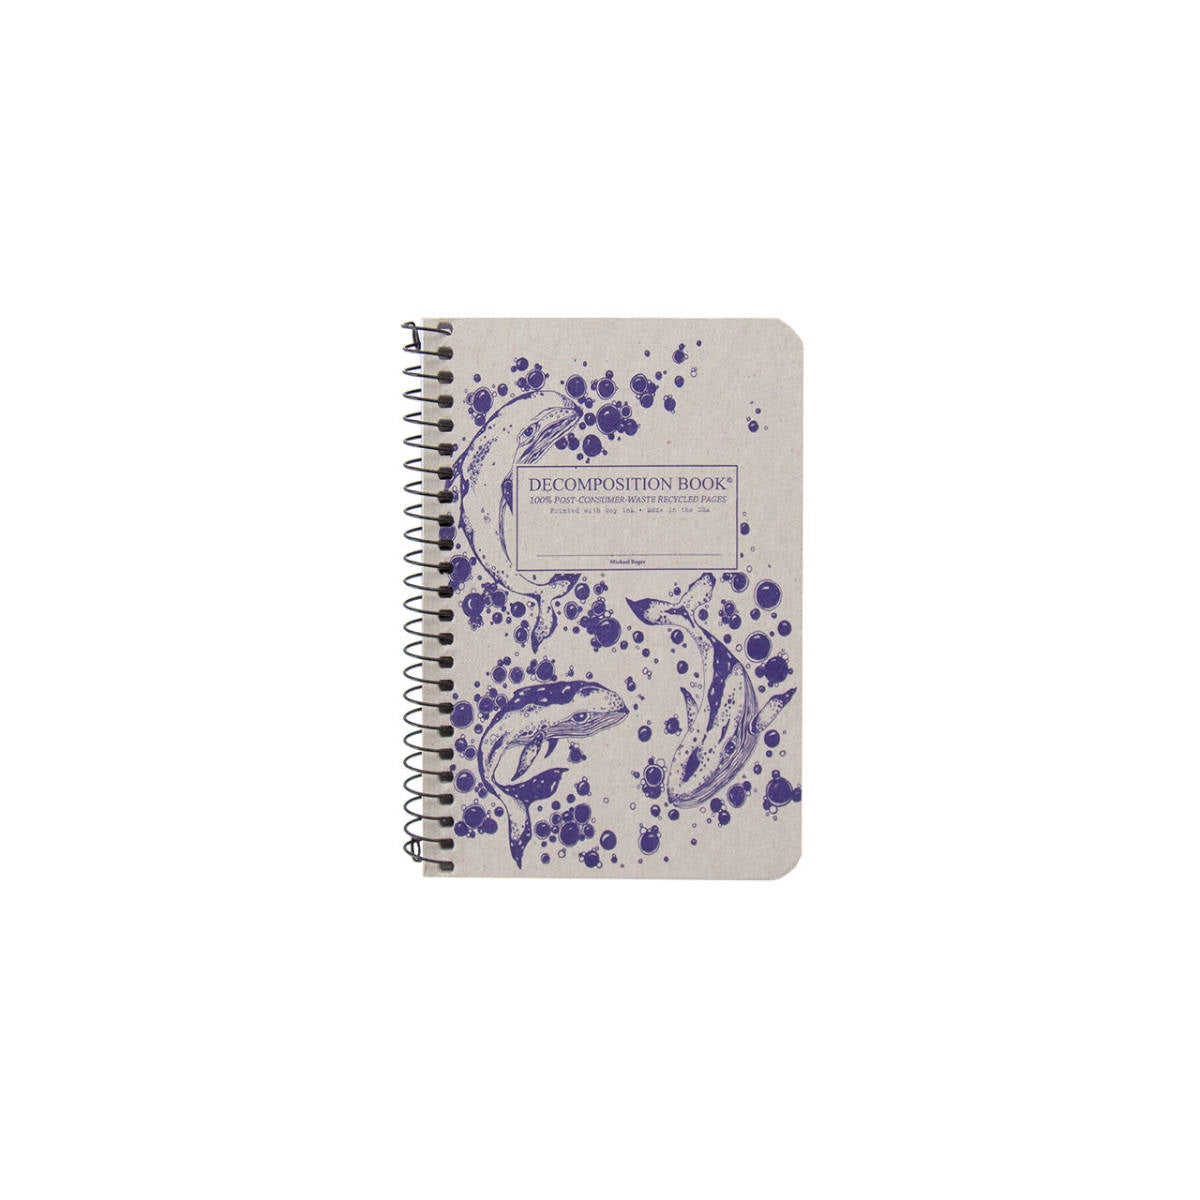 Decomposition Book - Pocket Spiral Notebook - Ruled - Humpback Whales